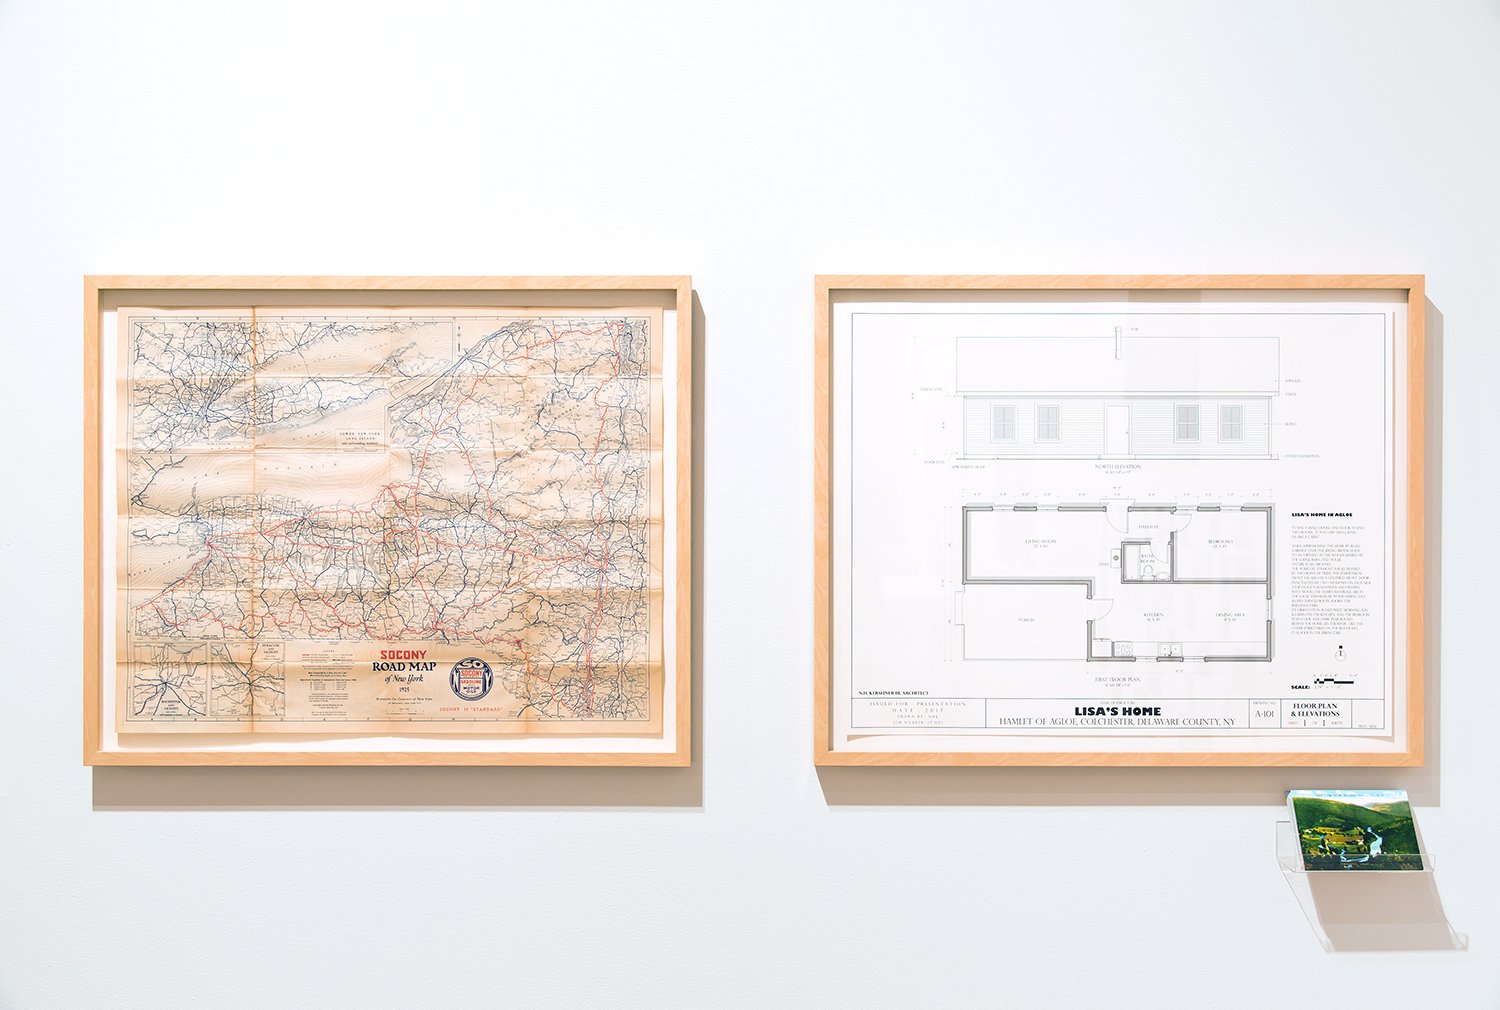   Agloe, NY (Lisa's Home) , Historical map, architectural drawing, postcards Approximately 30 x 62 inches Installation view detail,  Where Do We Stand? ,  The Drawing Center, NY, NY 